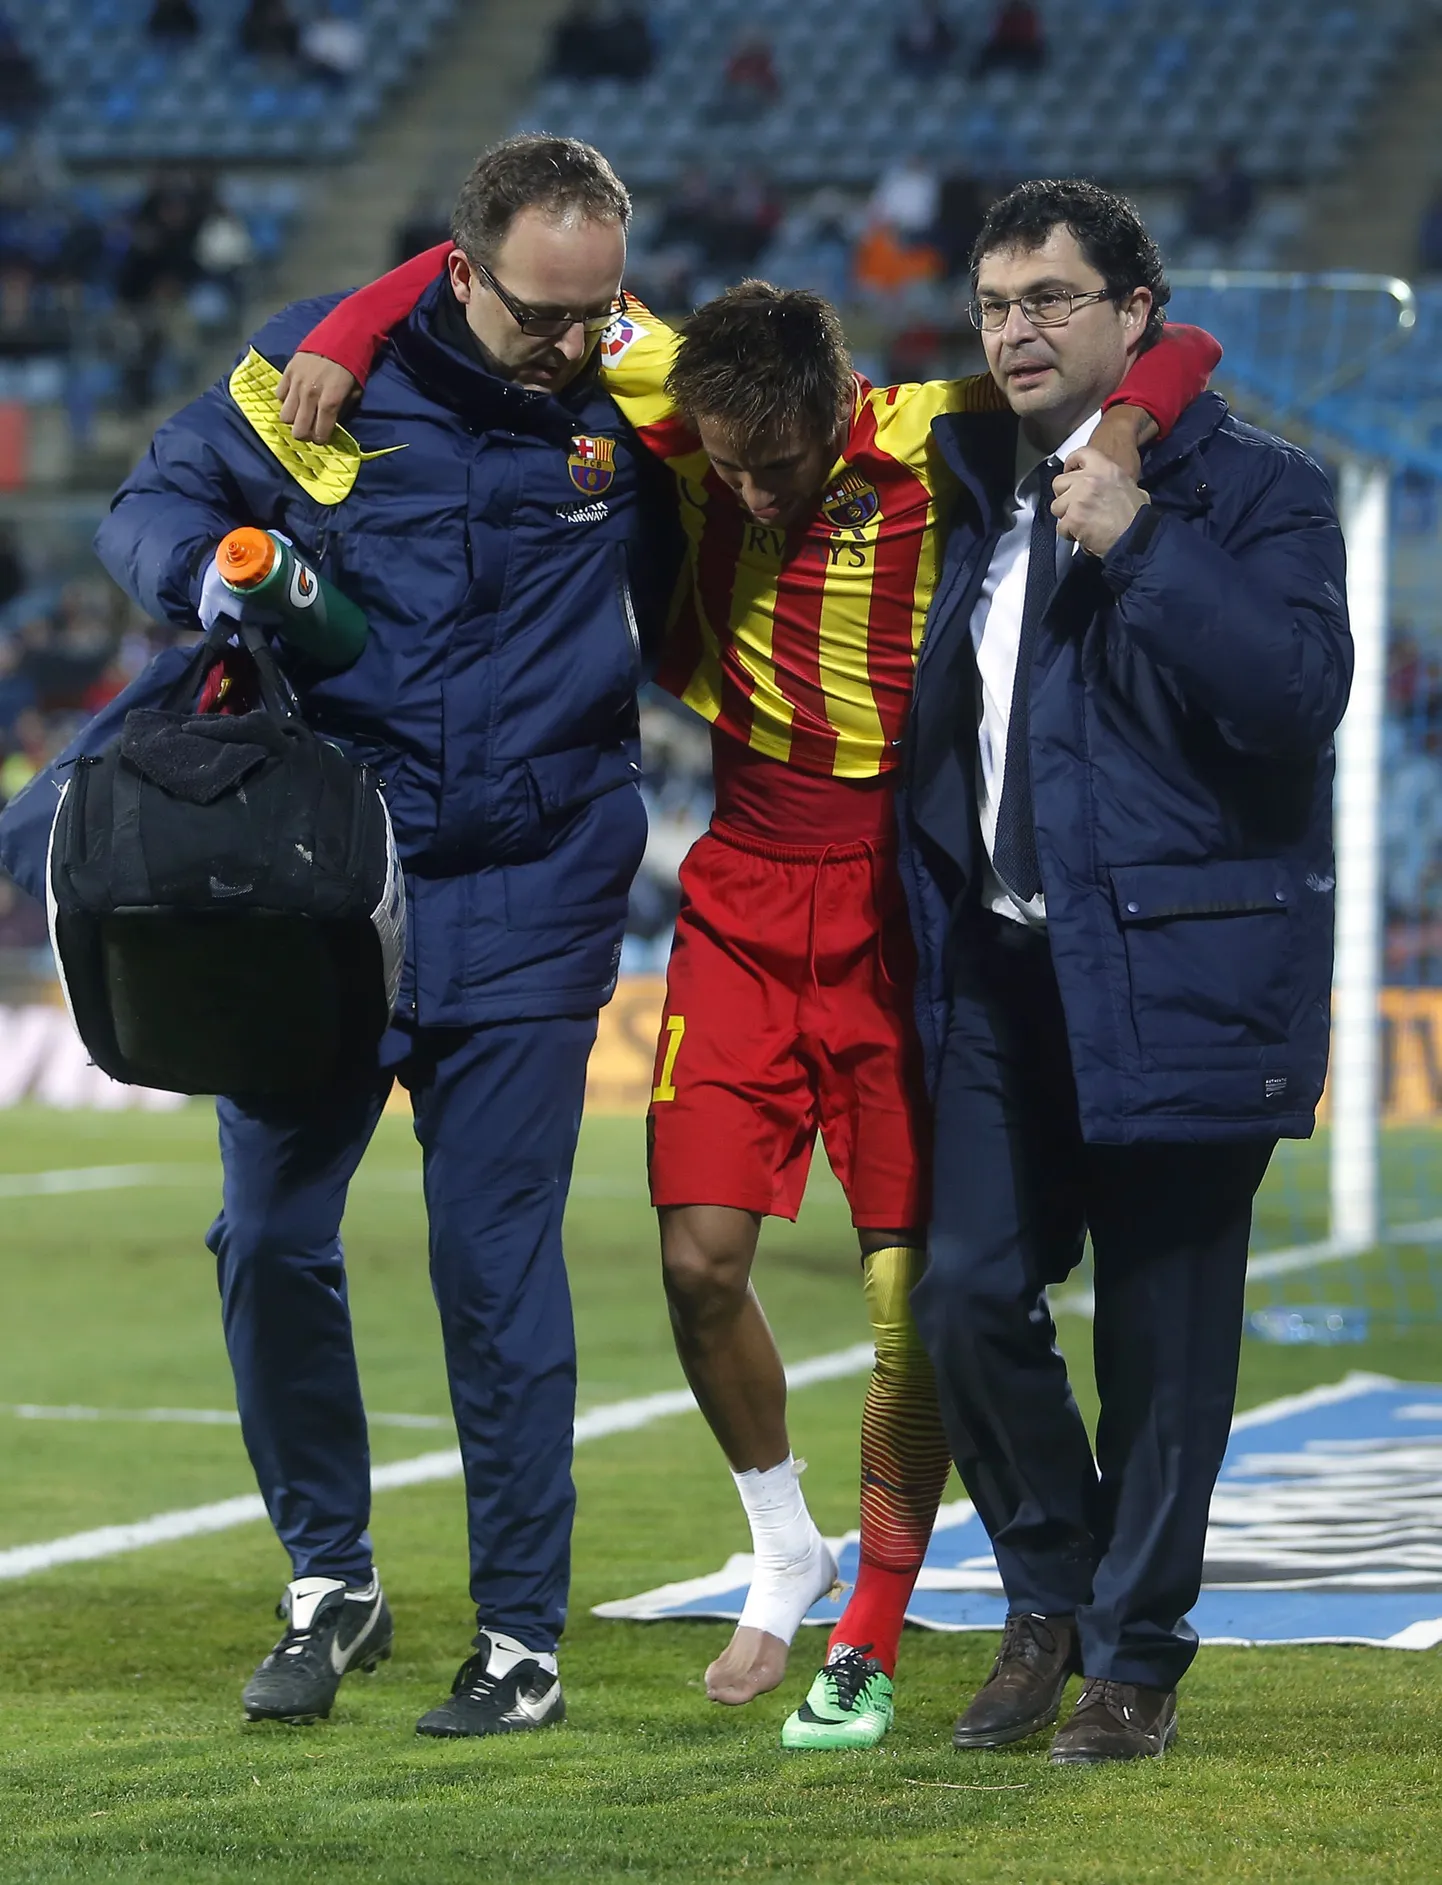 FC Barcelona's Neymar from Brazil, centre, leaves the field injured during a Spanish Copa del Rey match between FC Barcelona and Getafe at the Coliseum Alfonso Perez stadium in Madrid, Spain, Thursday, Jan. 16, 2014. (AP Photo/Andres Kudacki) / TT / kod 436